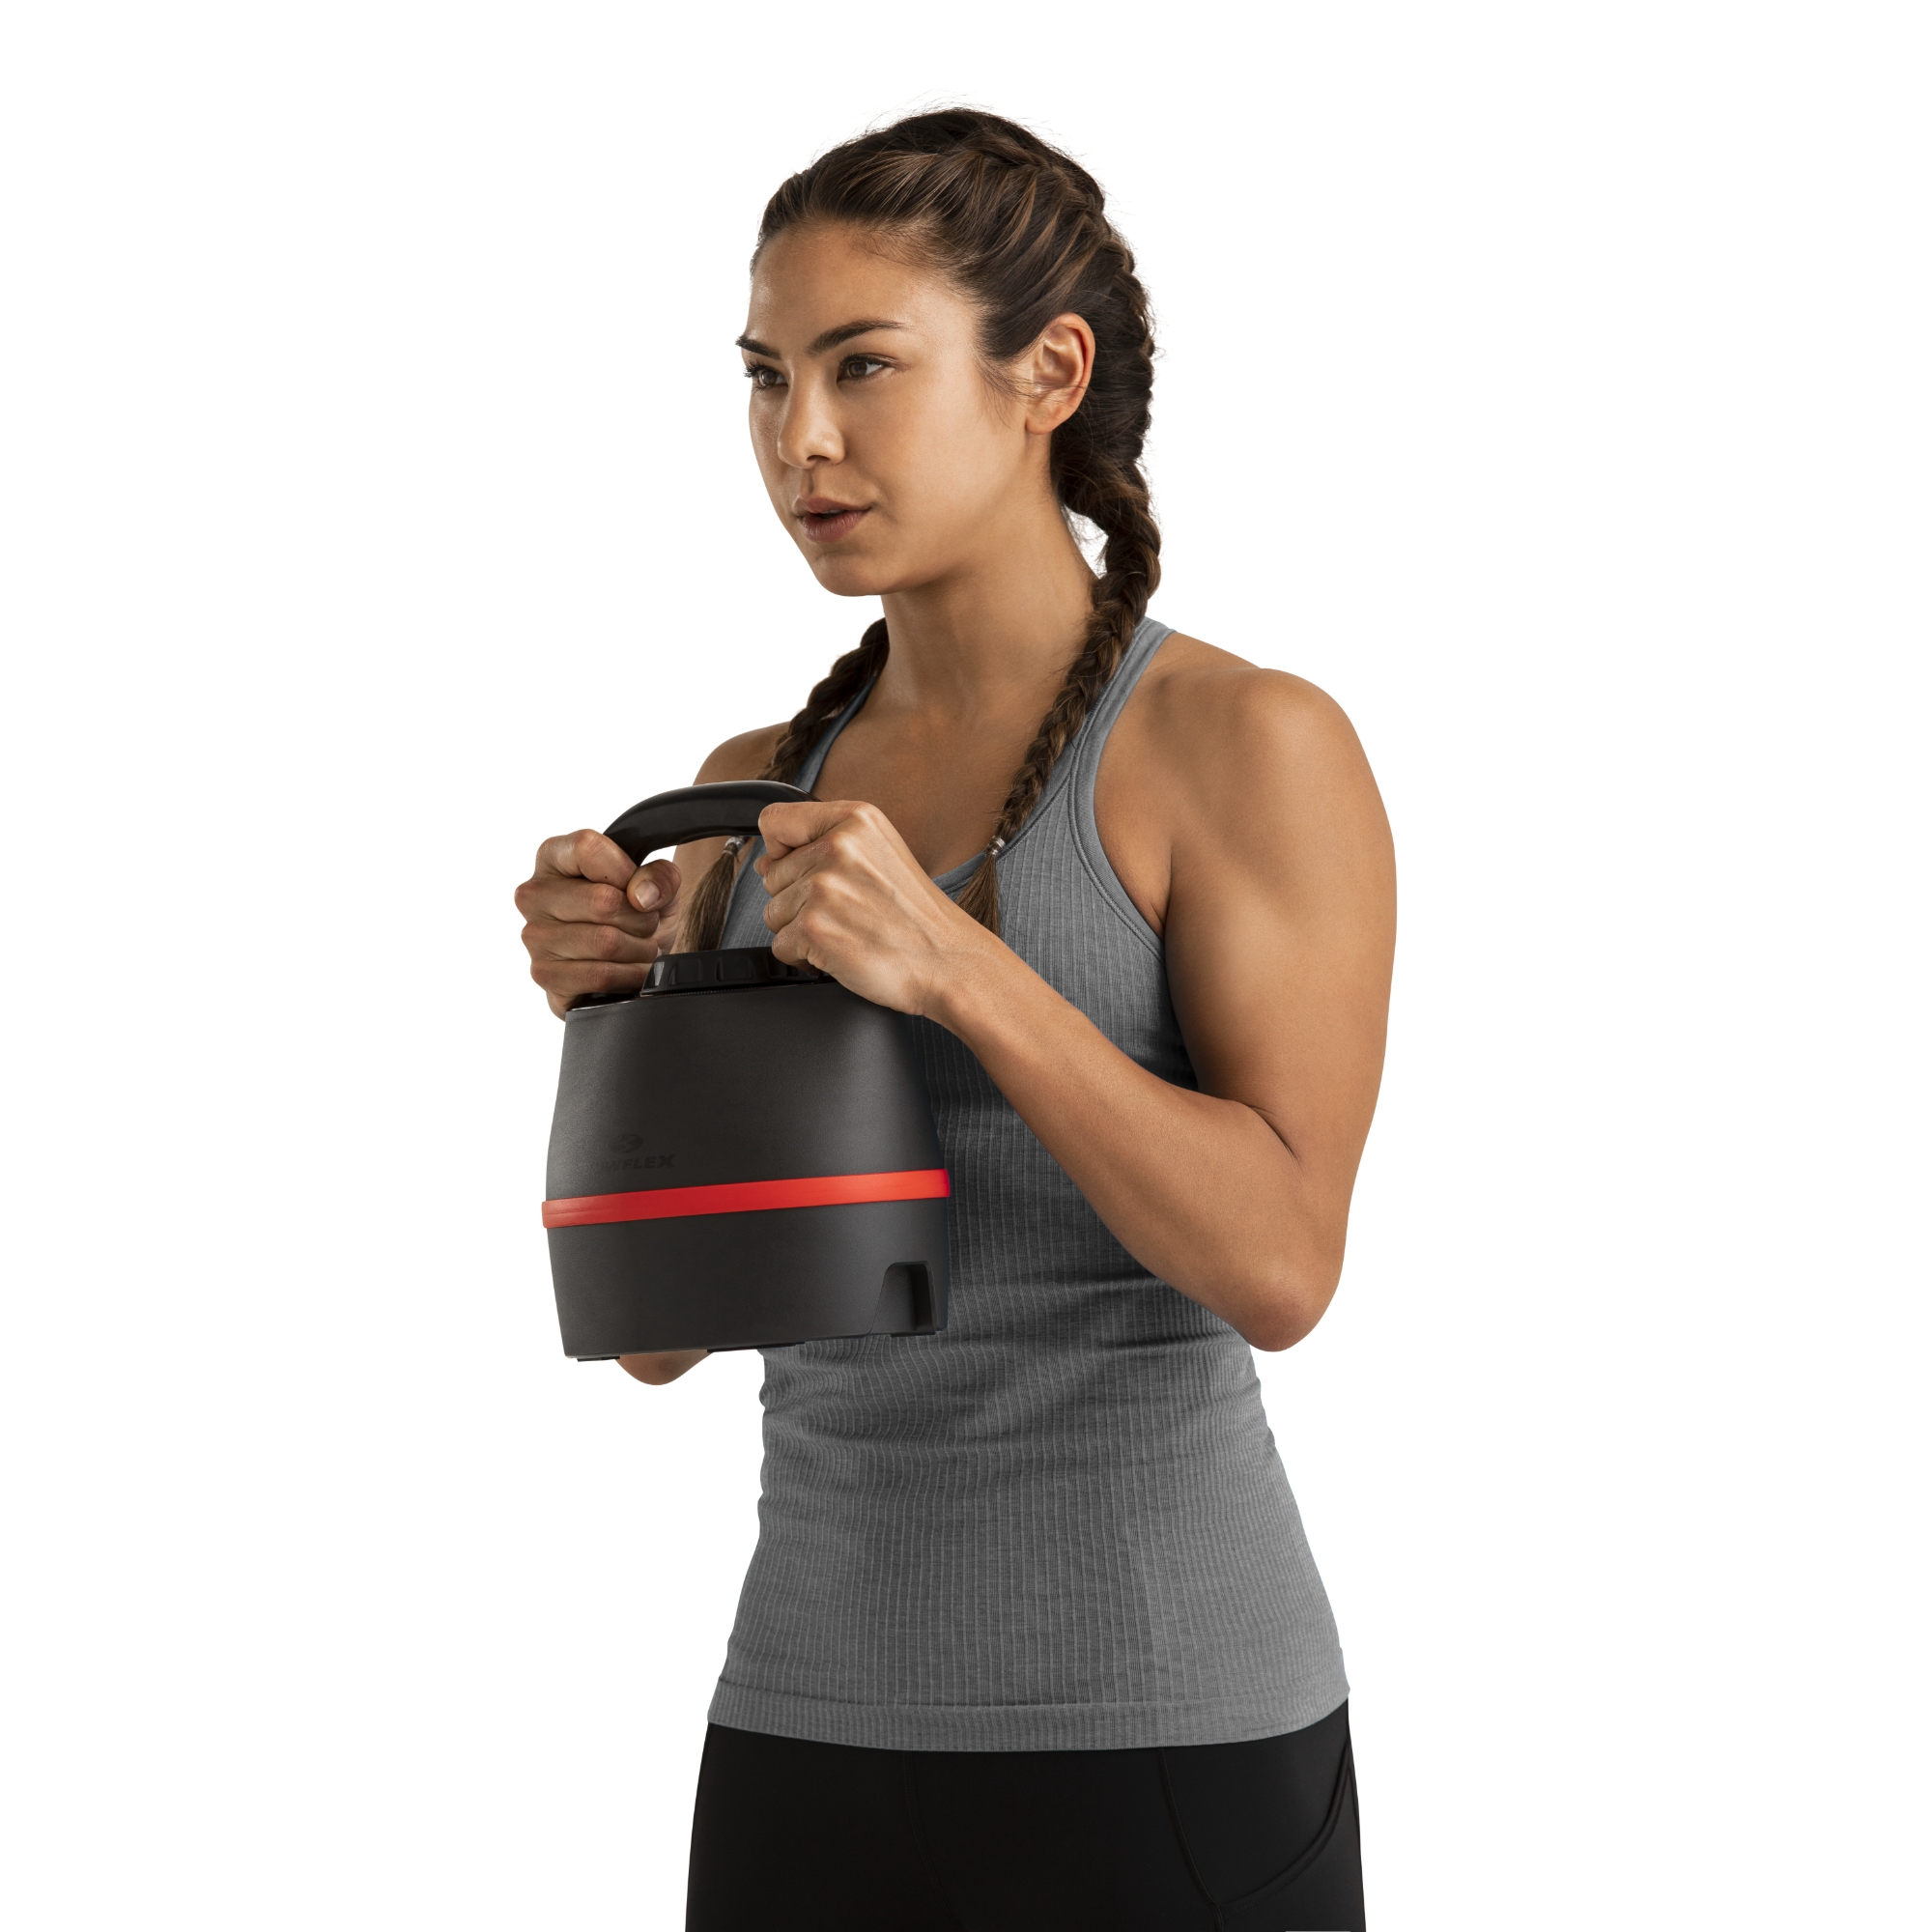 Bowflex SelectTech 840 Adjustable Kettlebell, 6 Weight Settings from 8-40 lbs, Single, Free 2-Month JRNY Membership - image 10 of 15